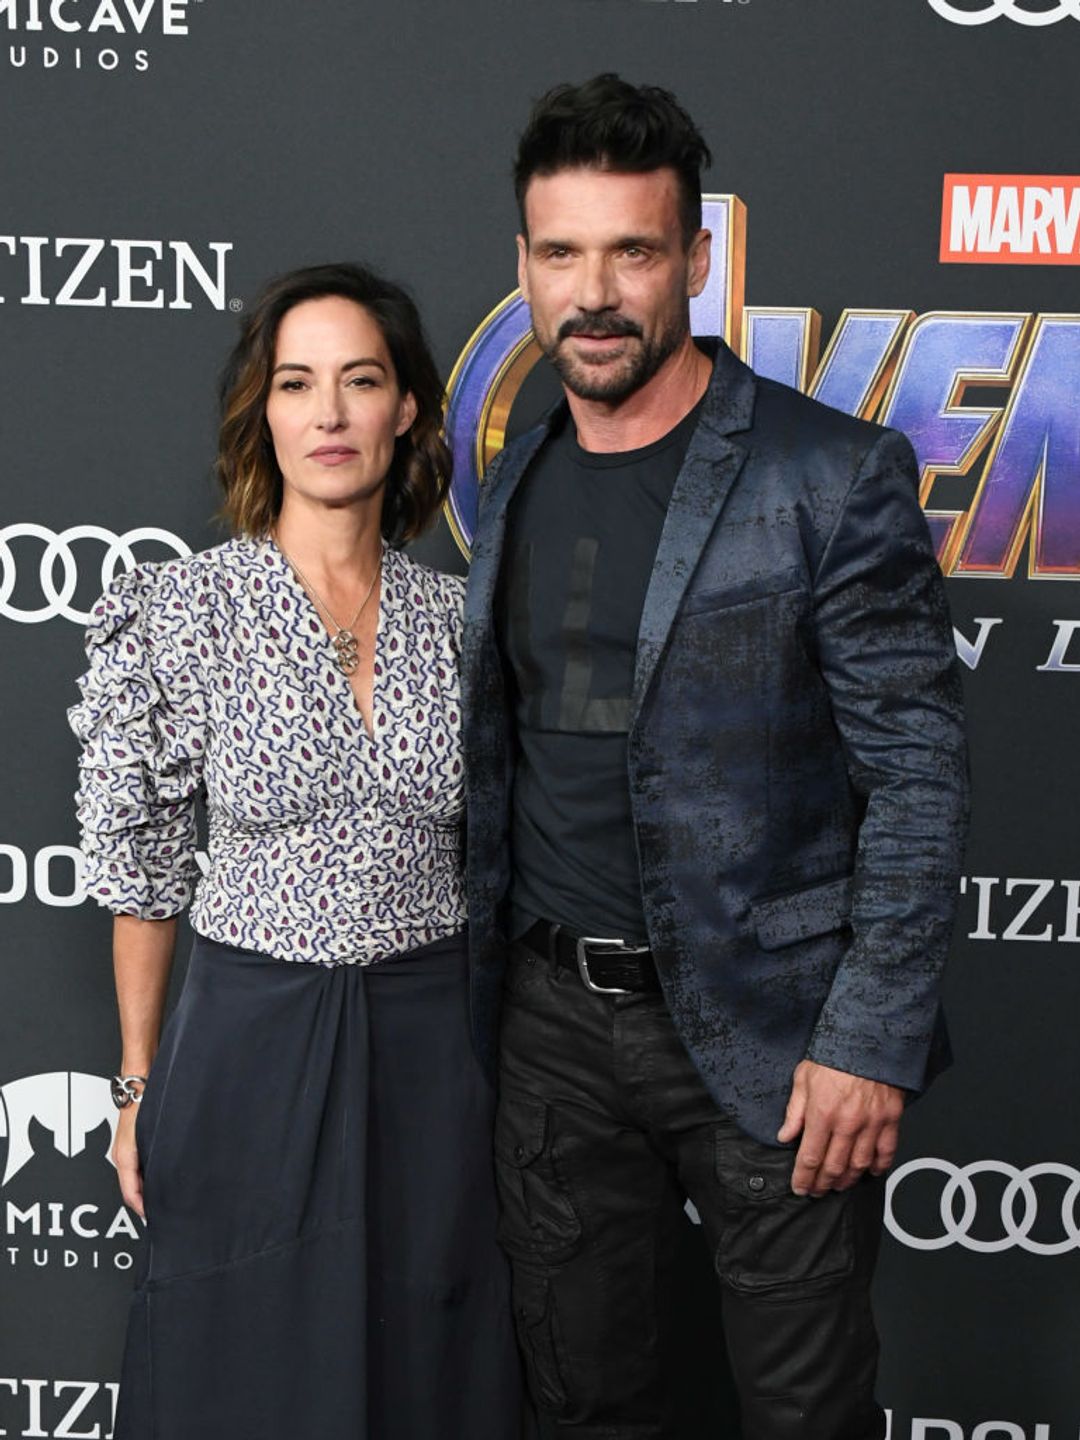 Wendy Moniz and Frank Grillo attend the World Premiere Of Walt Disney Studios Motion Pictures "Avengers: Endgame" at Los Angeles Convention Center on April 22, 2019 